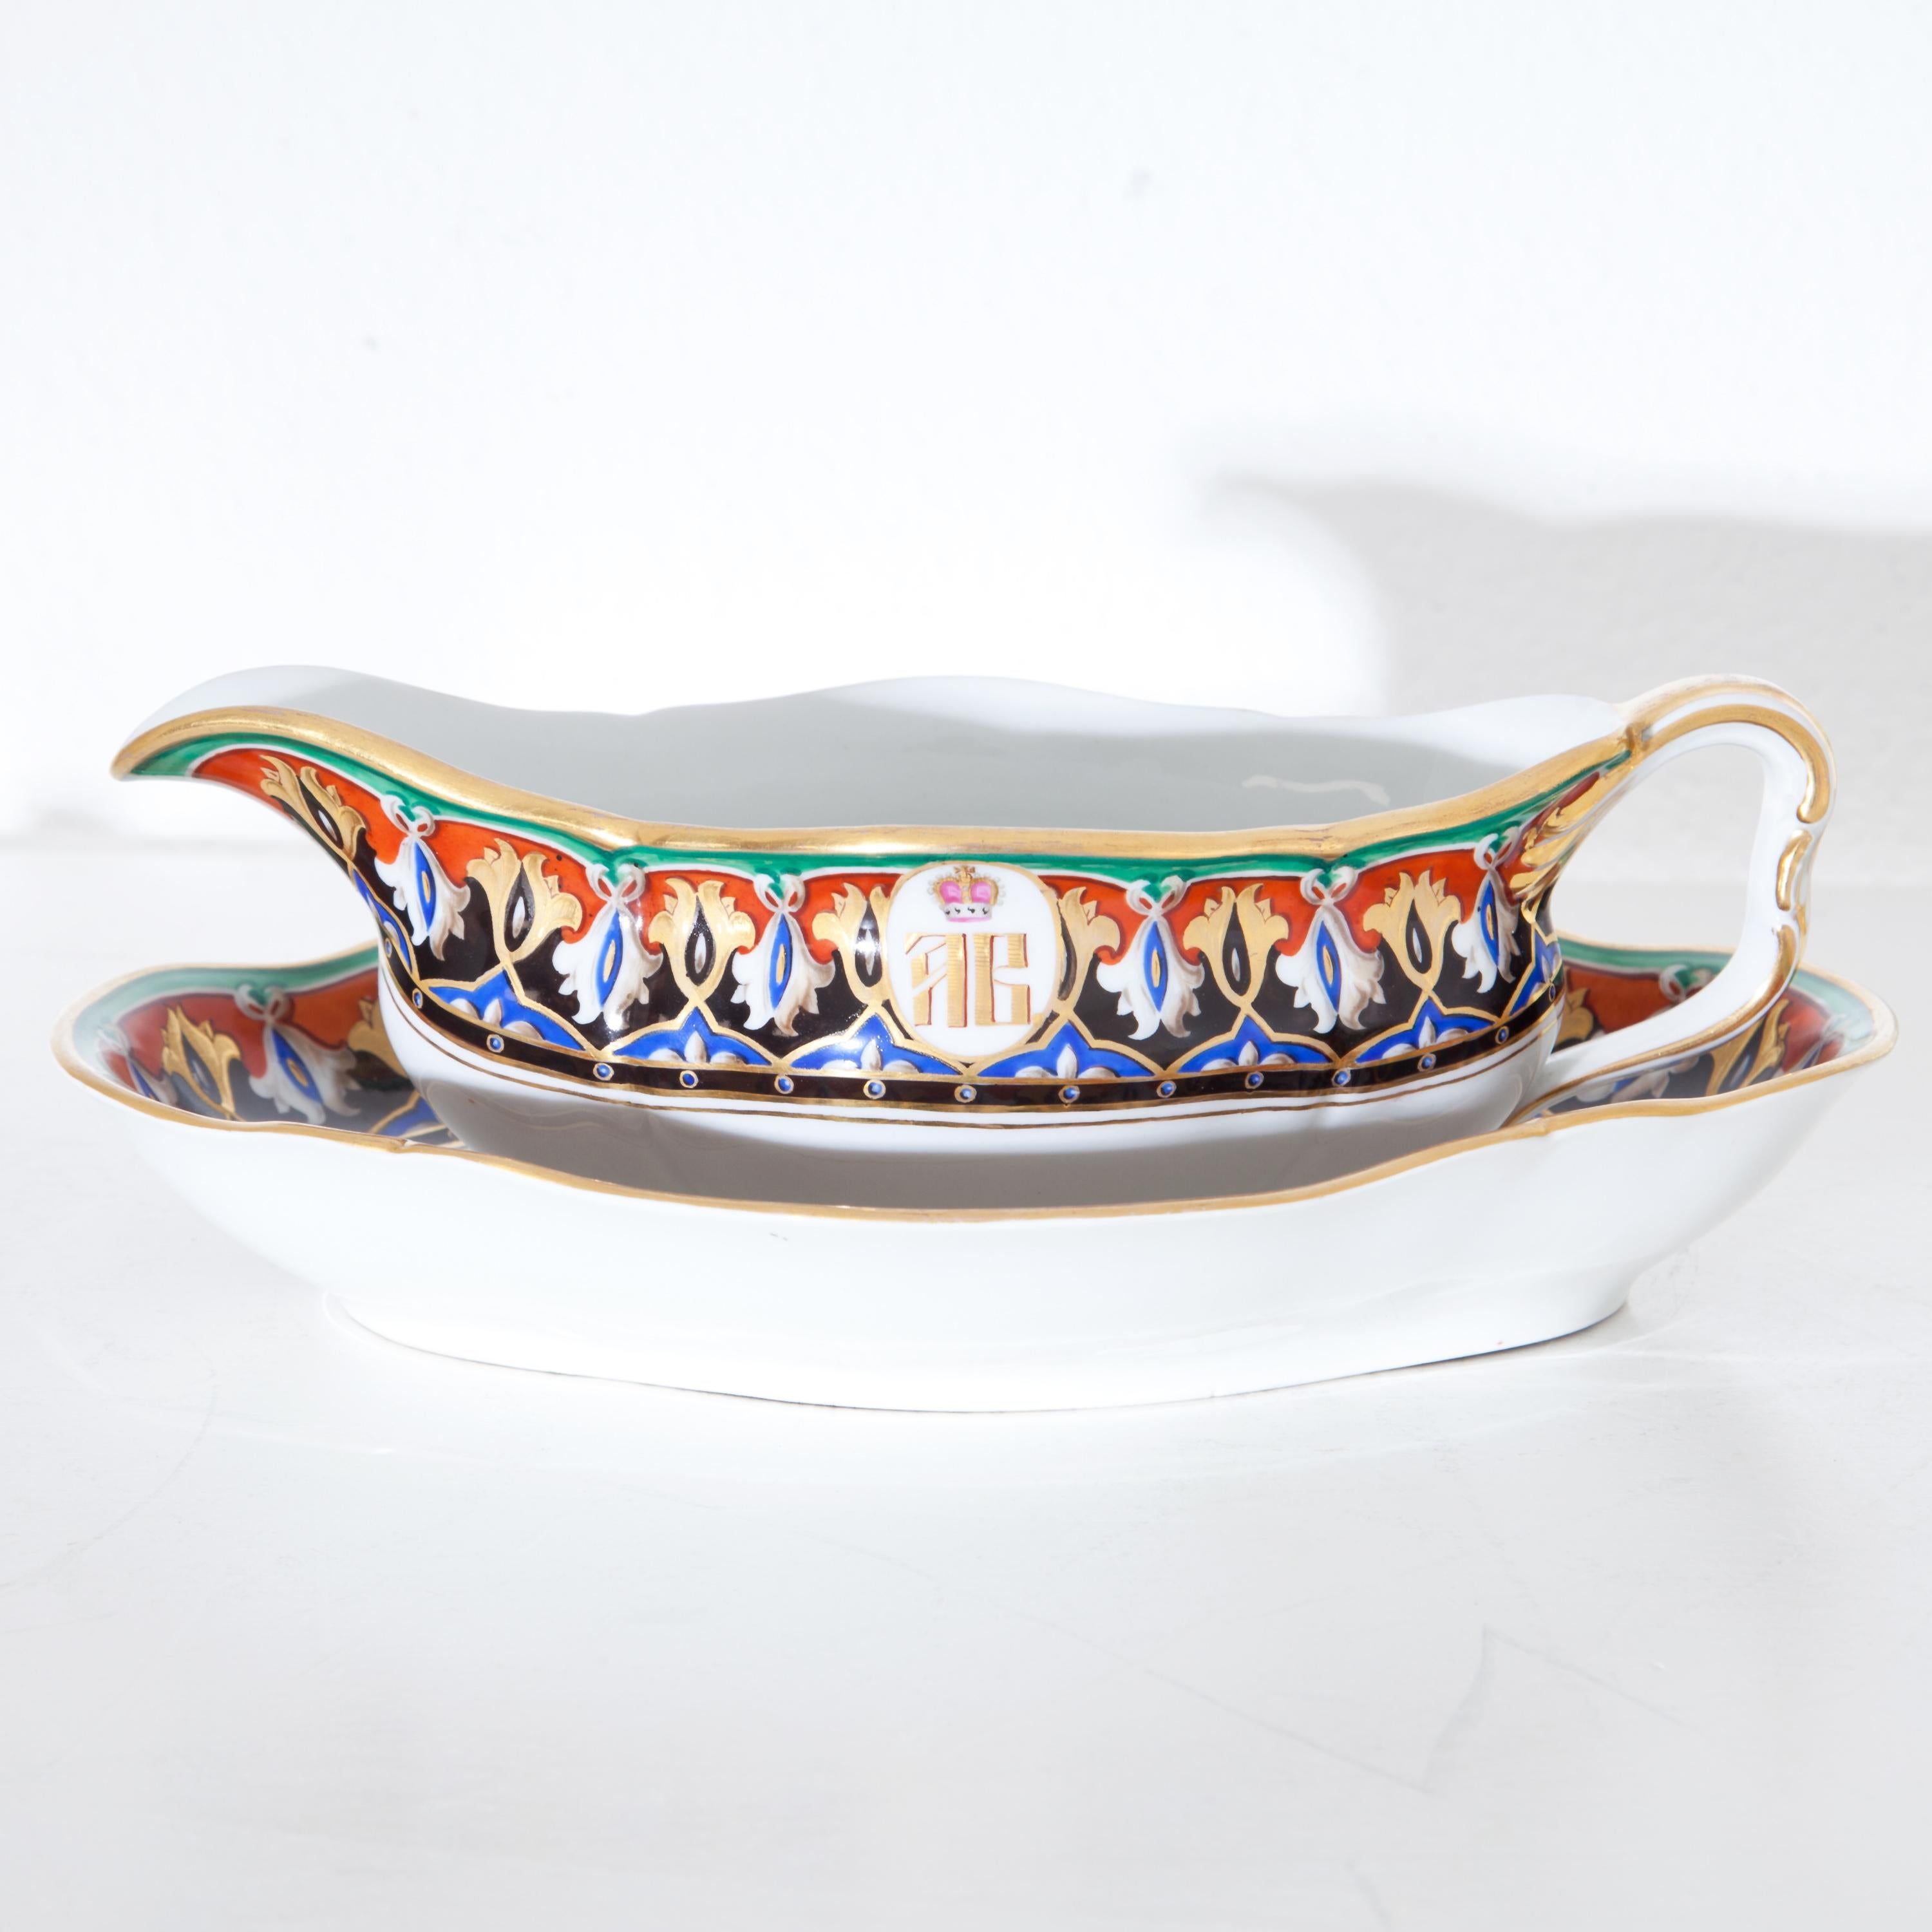 Porcelain Gravy Boat and Spoon with Monogram WA, KPM, Berlin, Germany, 1849-1870 For Sale 3